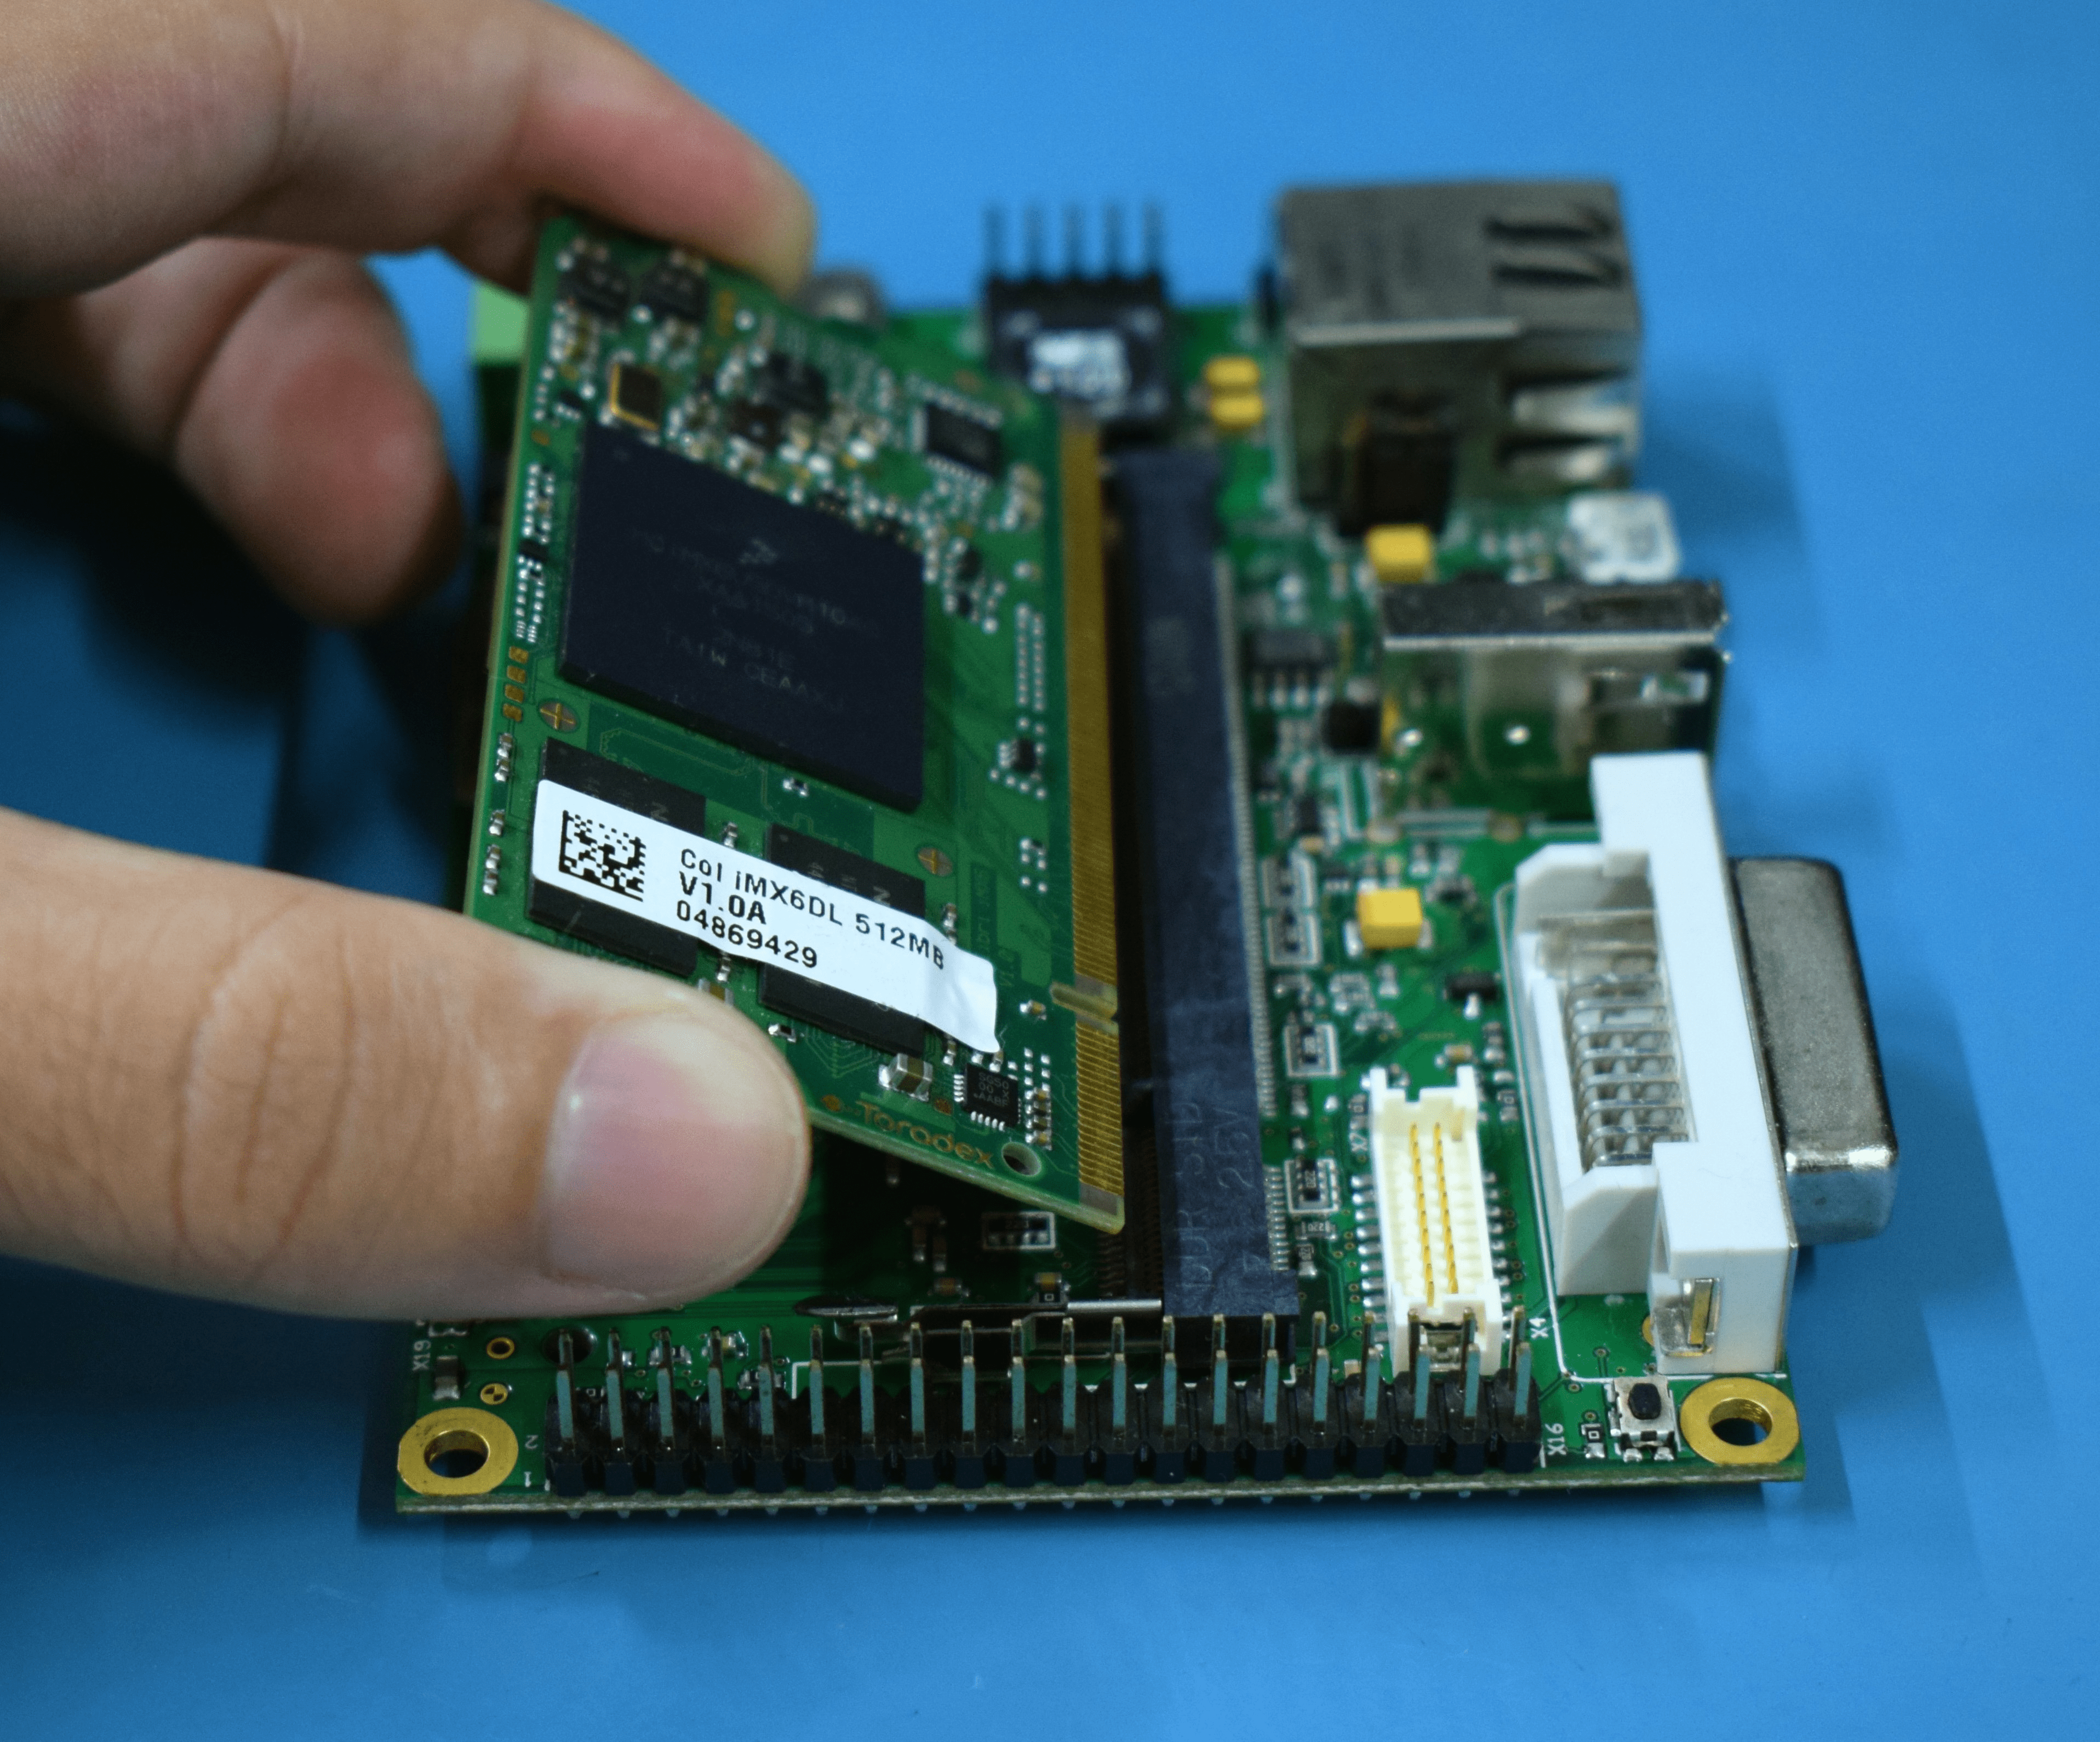 Connecting the computer on module to the Iris Carrier Board